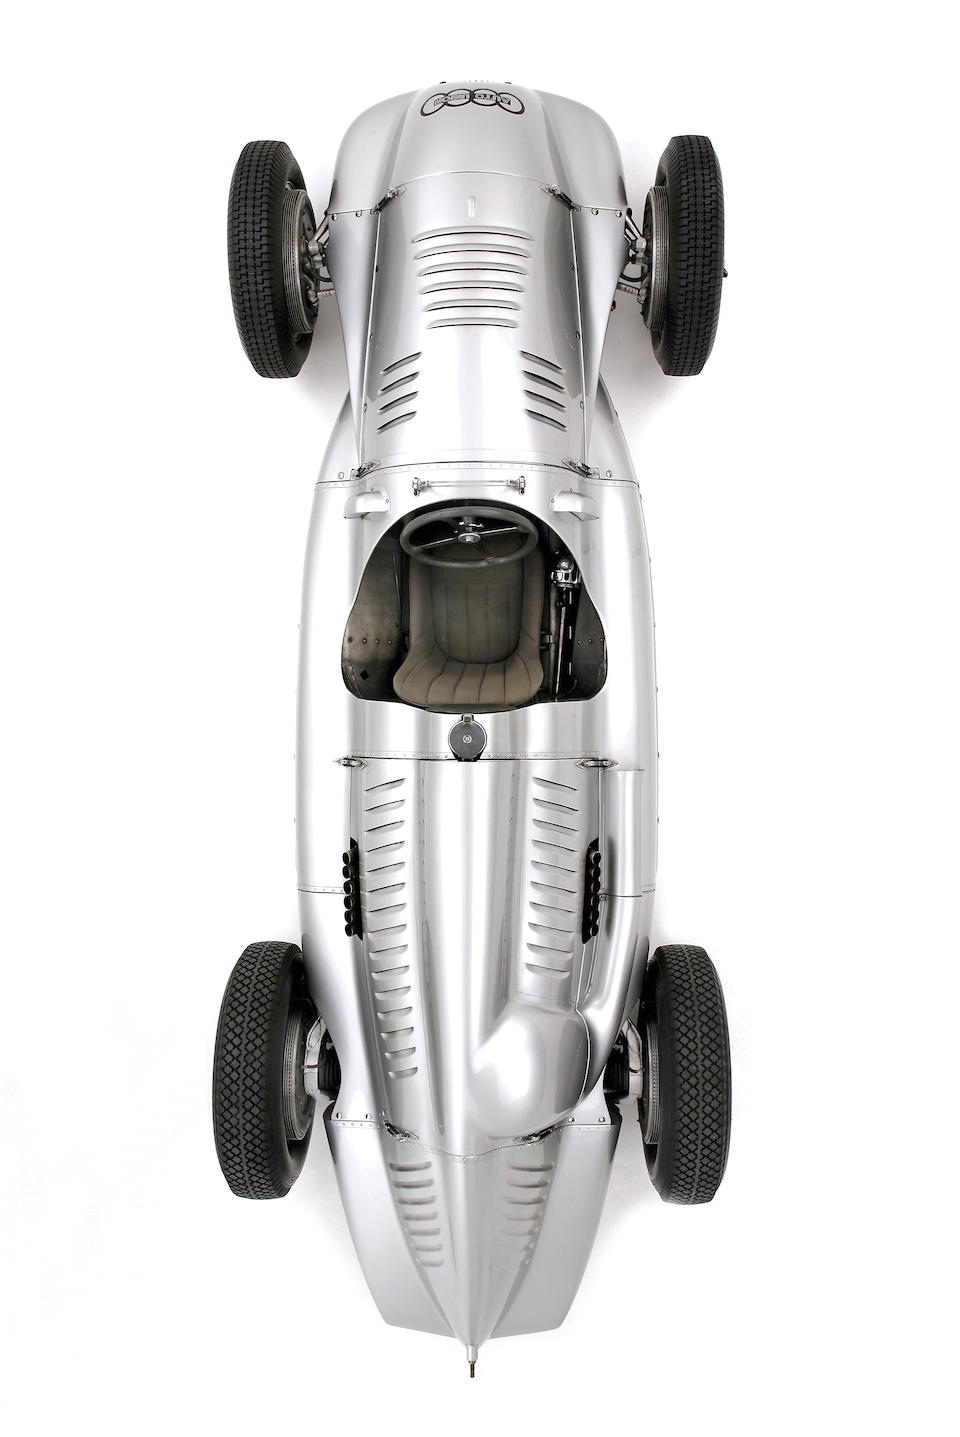 The Ex-works, ex-Hans Stuck, Rudolf Hasse and team-mates,1939 Auto Union 3-liter 'D-Type' V12 Grand Prix Racing Single-Seater  Chassis no. '19' Engine no. 17